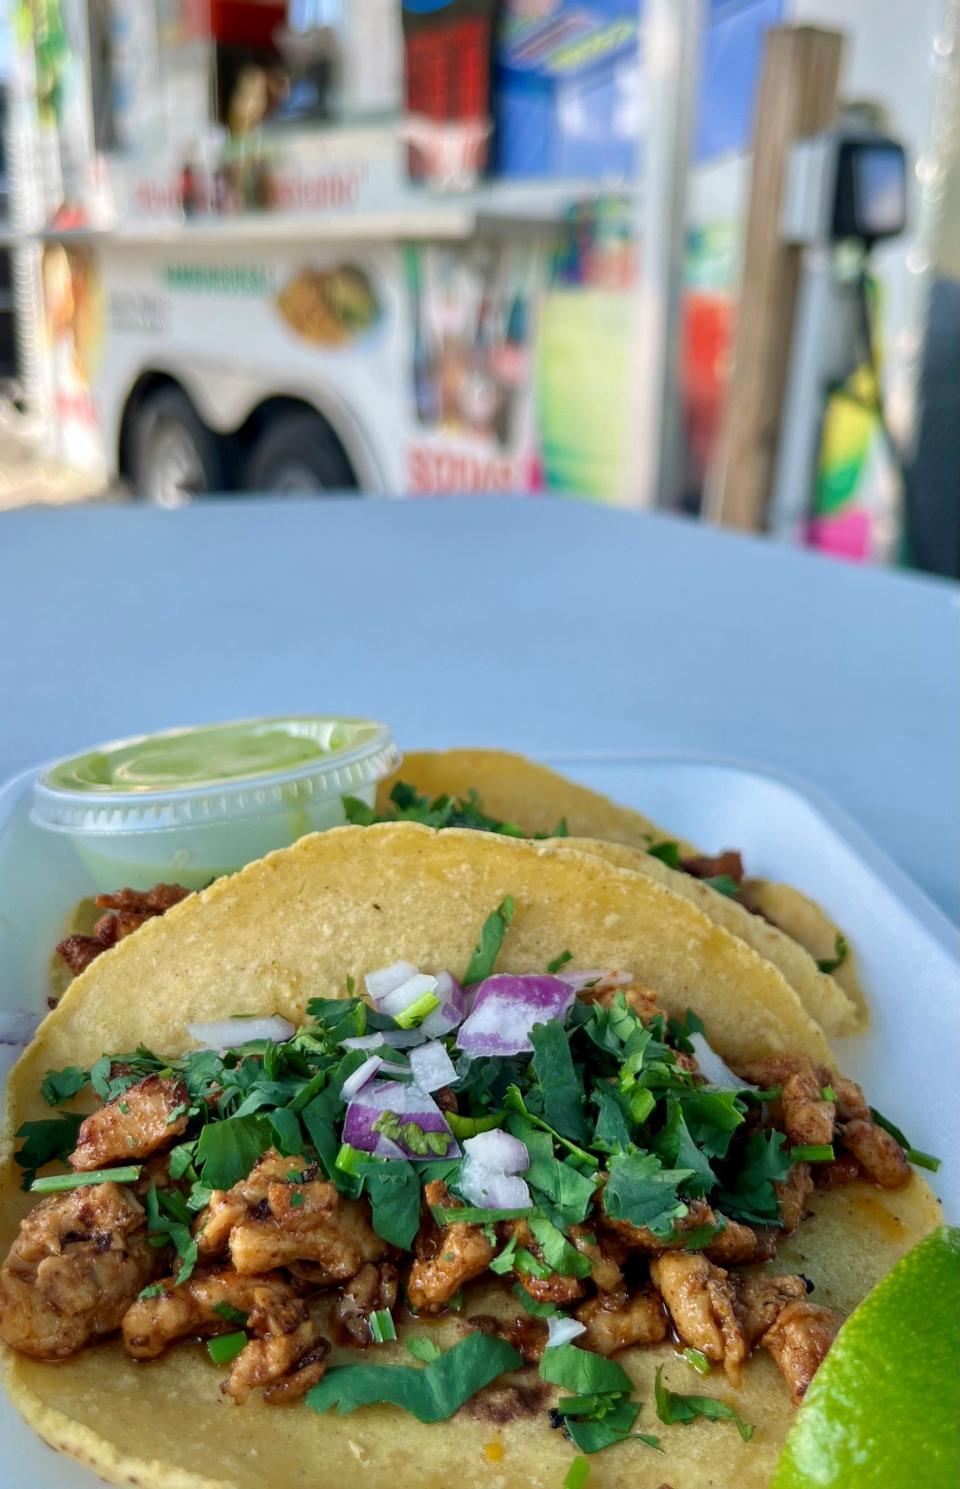 Tacos and steak burritos are best-sellers at the Tacos El Viejon food truck near the four-way stop in Bokeelia.